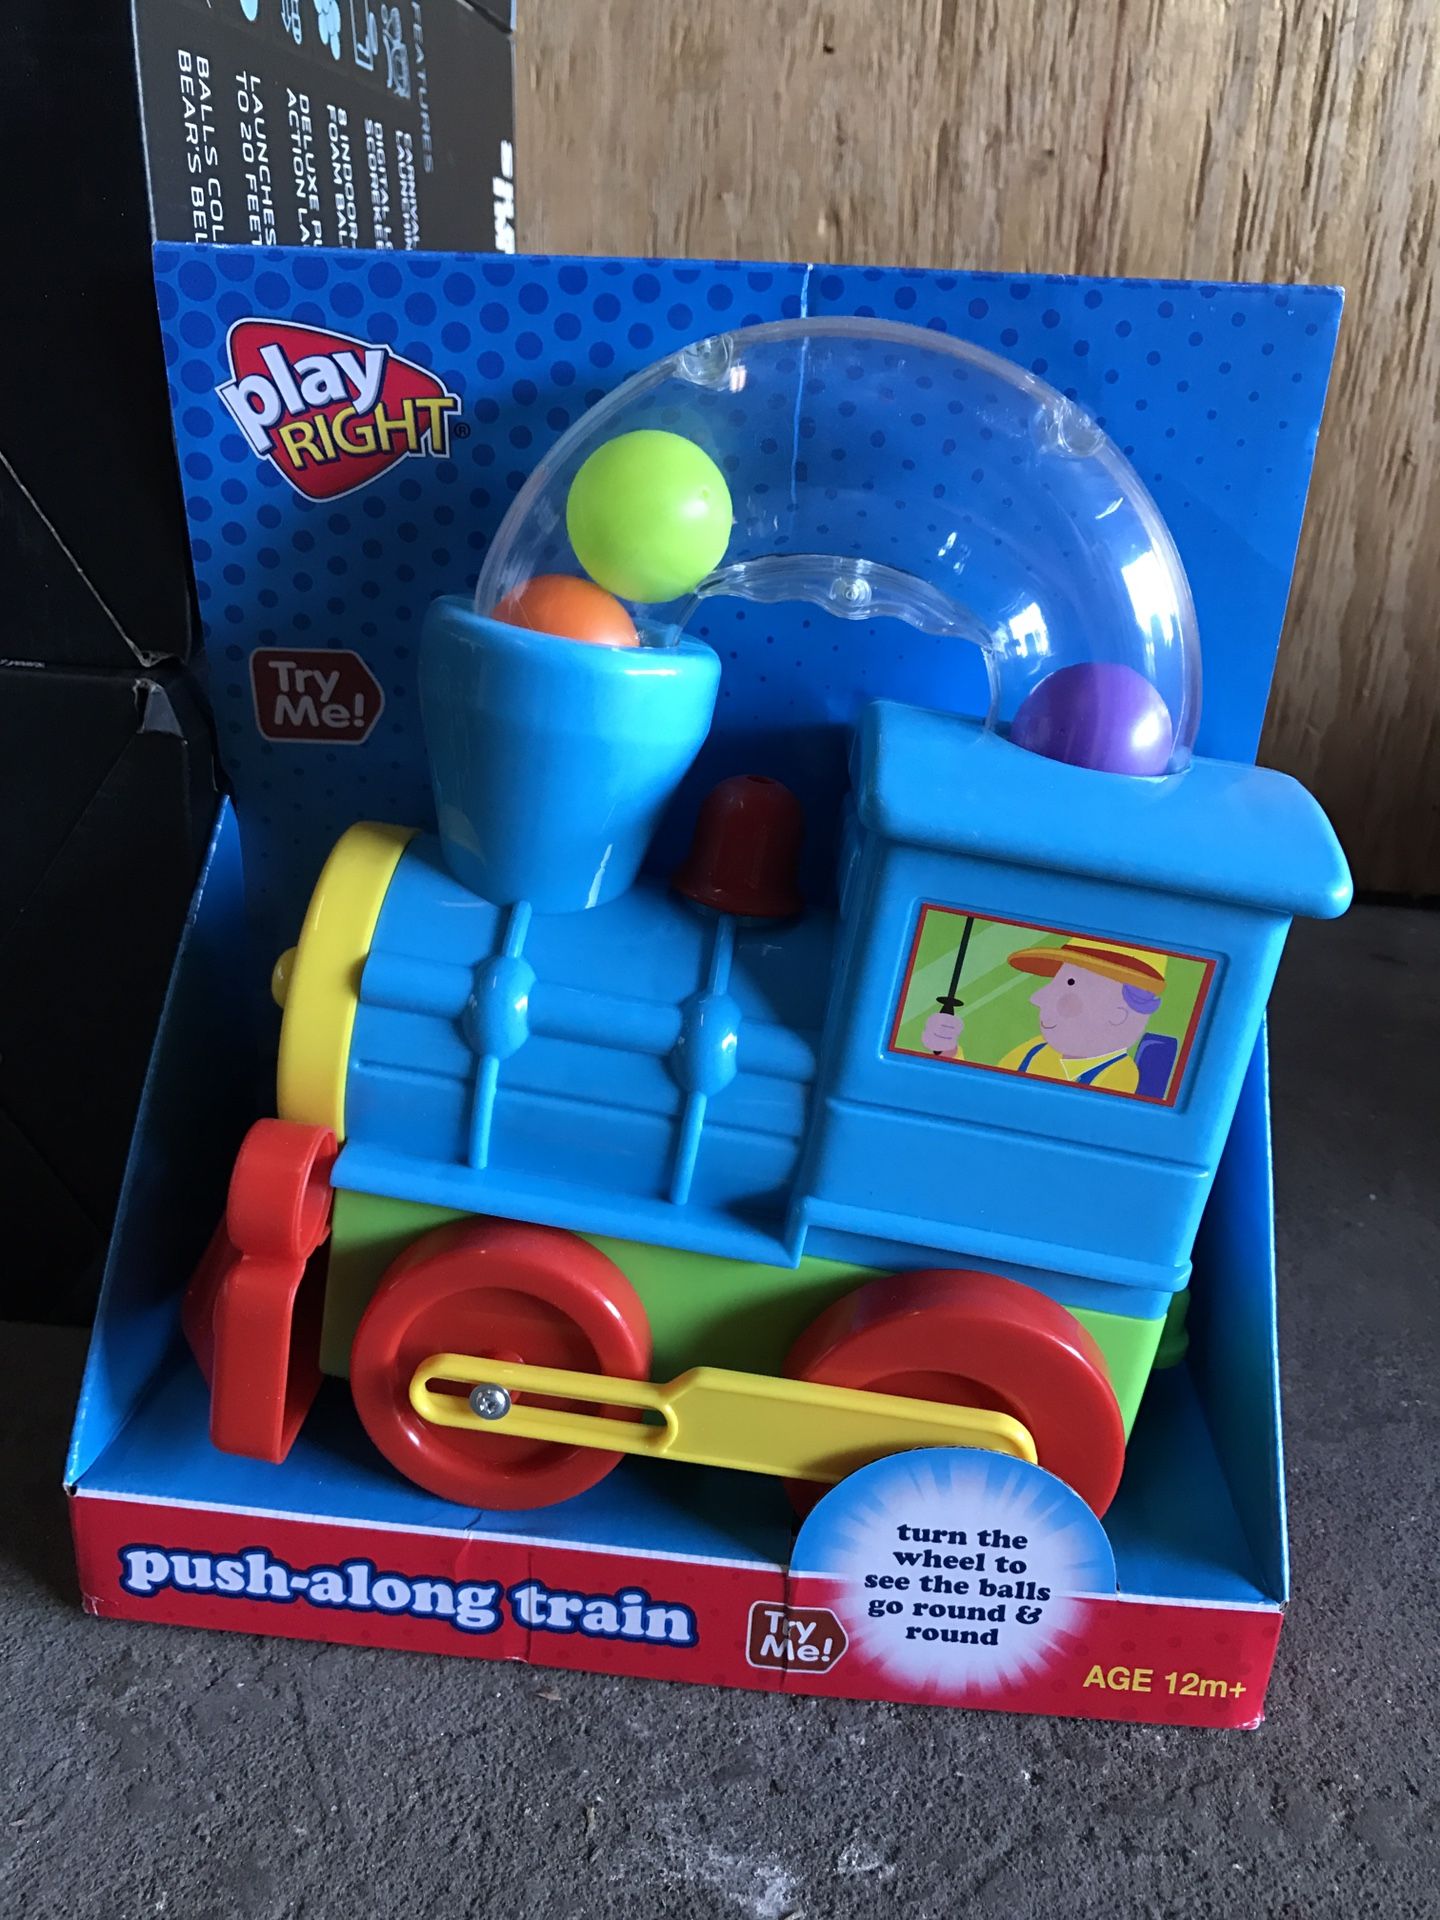 Play Right kids push along train baby toy